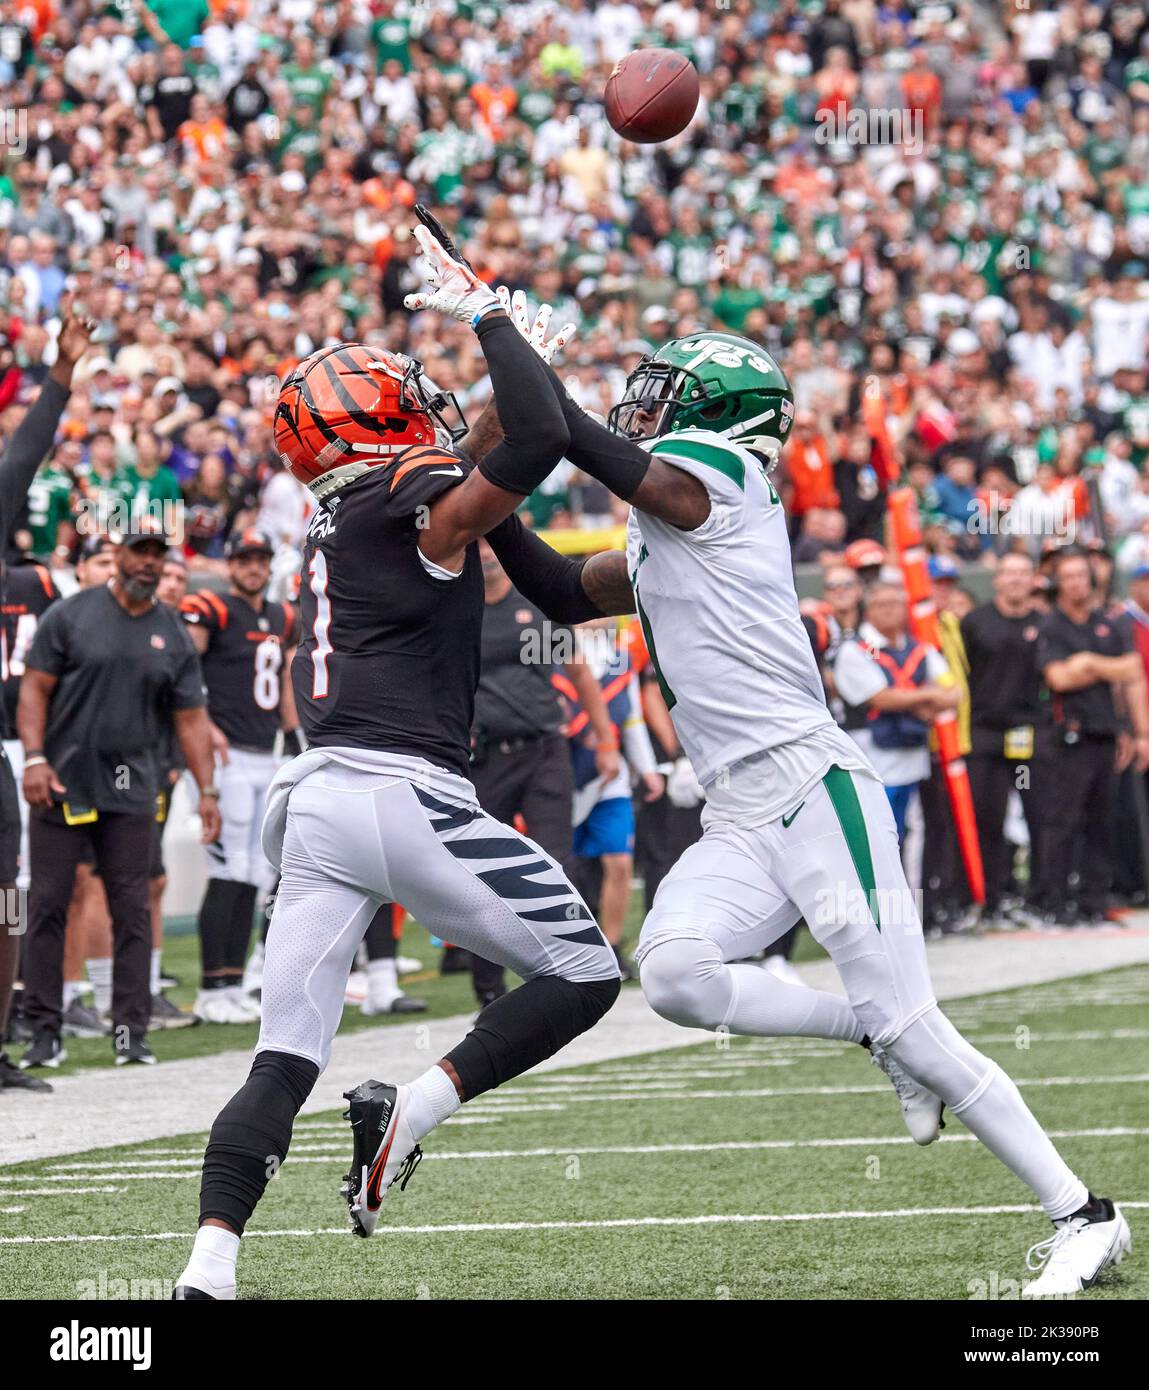 East Rutherford, New Jersey, USA. 25th Sep, 2022. New York Jets cornerback Sauce  Gardner (1) breaks up a pass intended for Cincinnati Bengals wide receiver  Ja'Marr Chase (1) during a NFL game